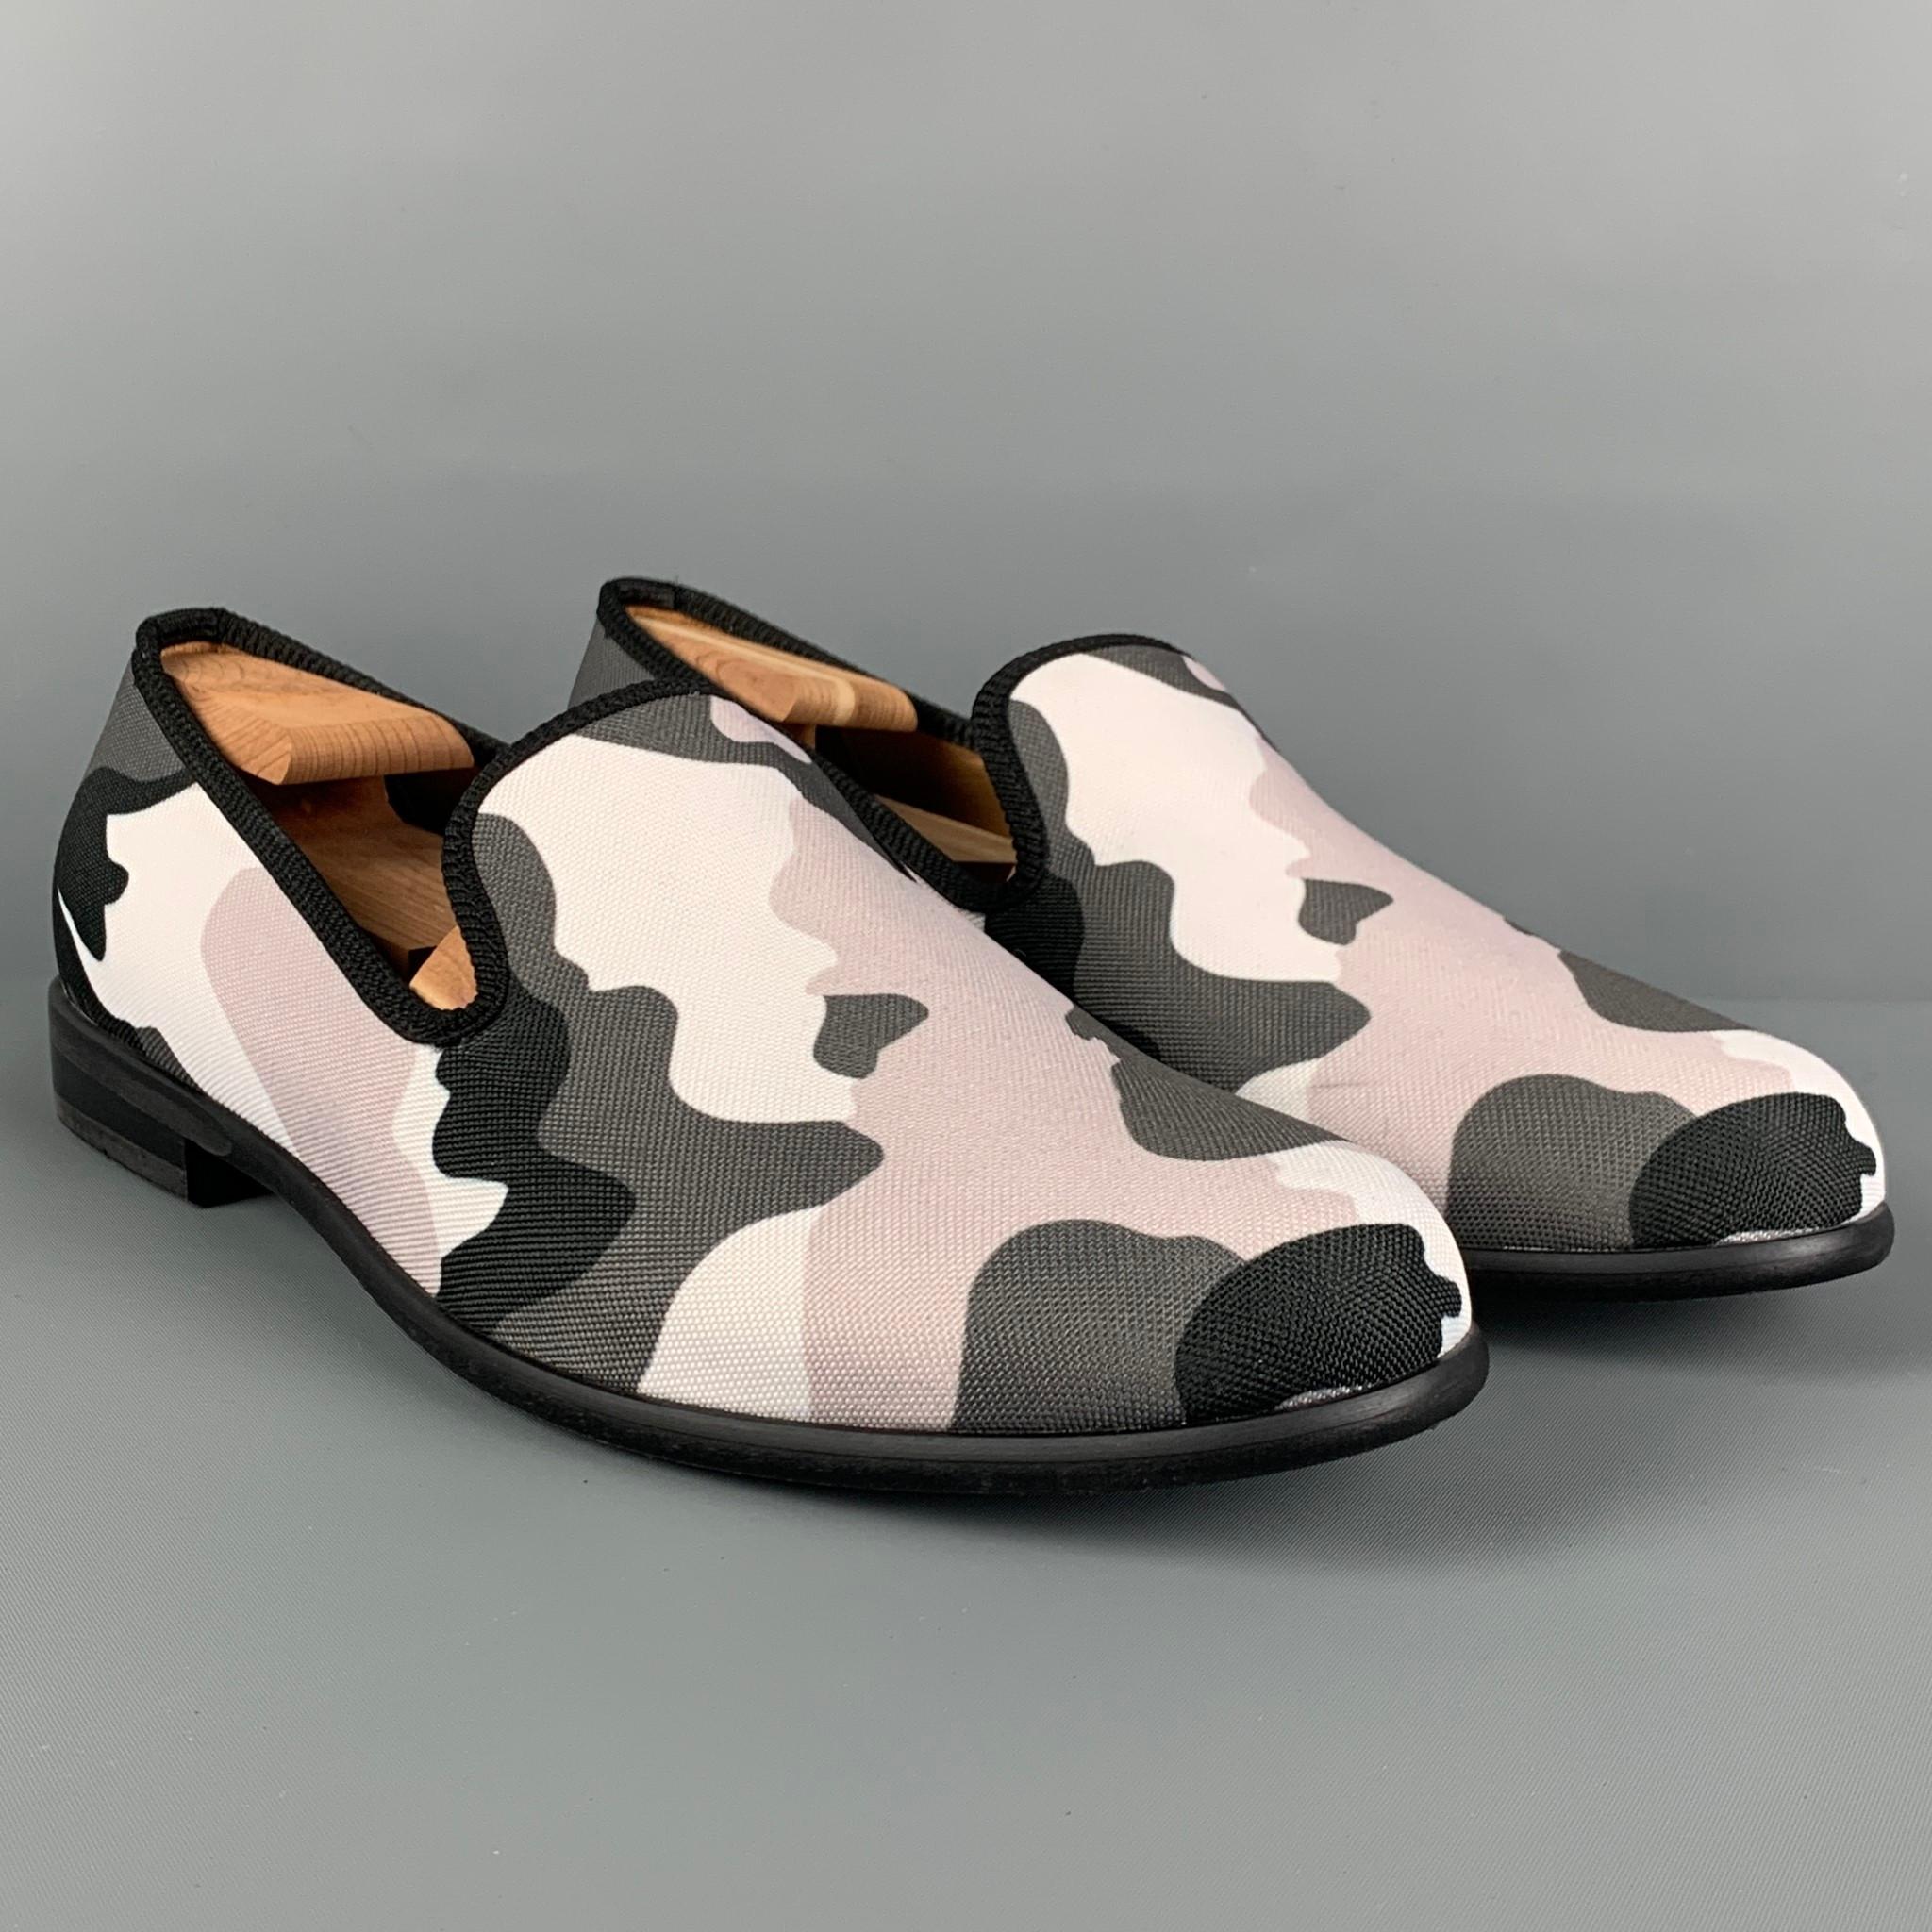 DUKE + DEXTER loafers comes in a grey & white camouflage canvas featuring a slip on style. Handmade in England.

Very Good Pre-Owned Condition.
Marked: 11

Outsole: 12 in. x 4 in. 